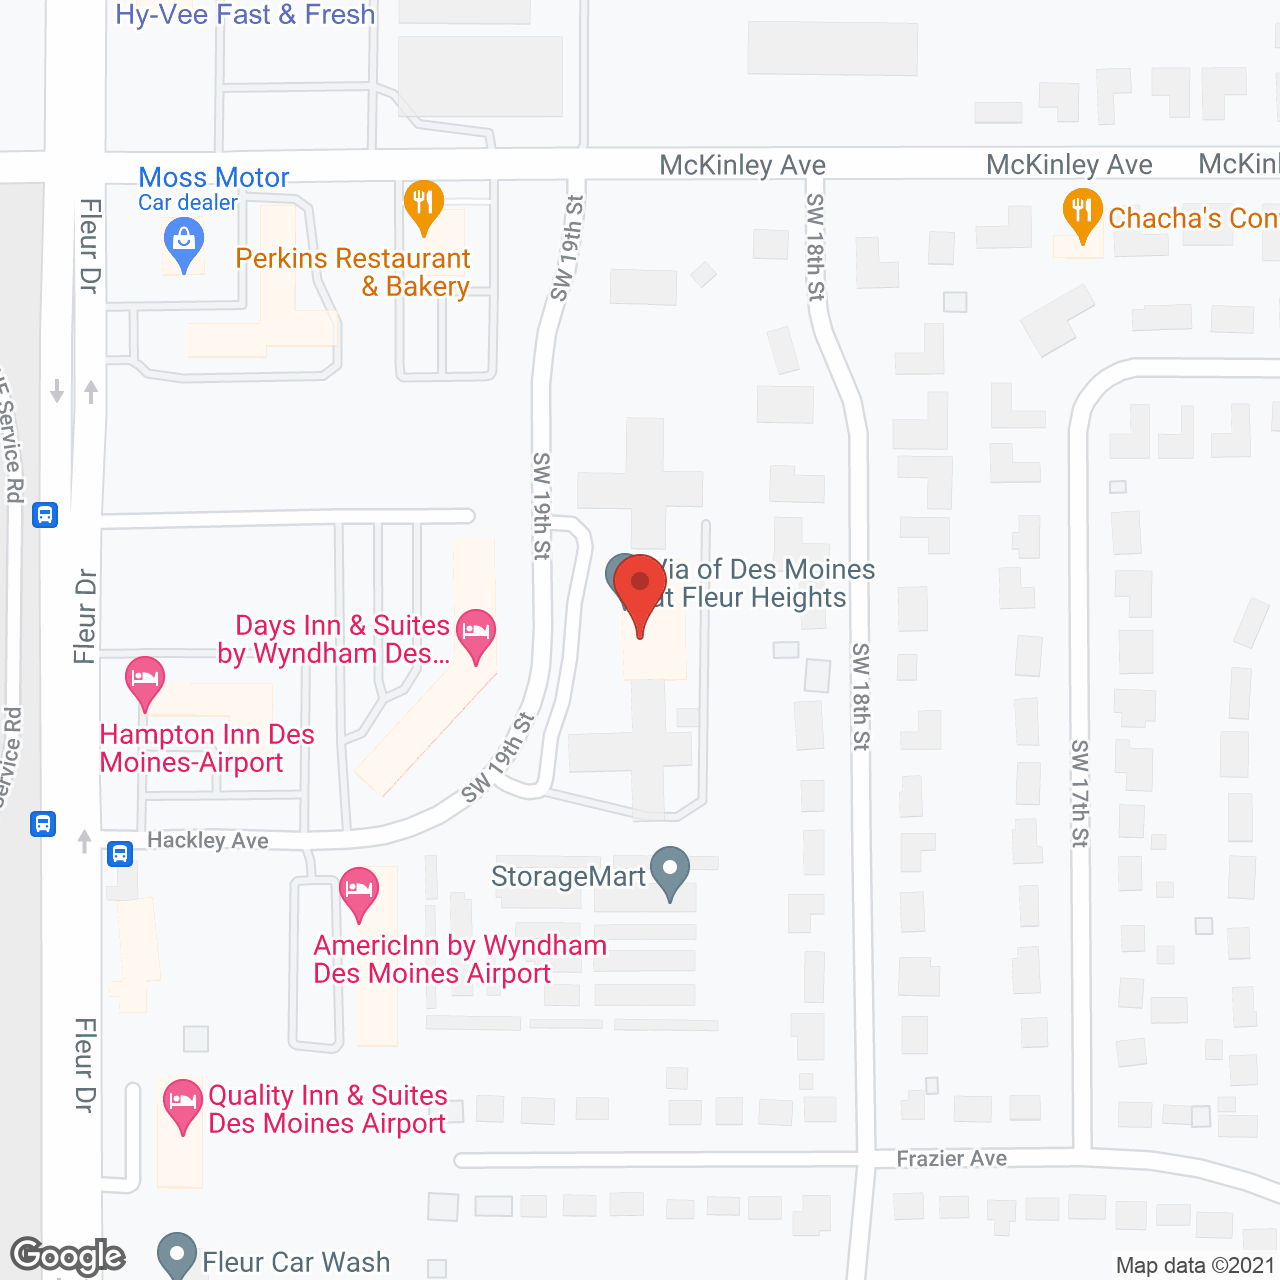 Fleur Heights Care Center in google map